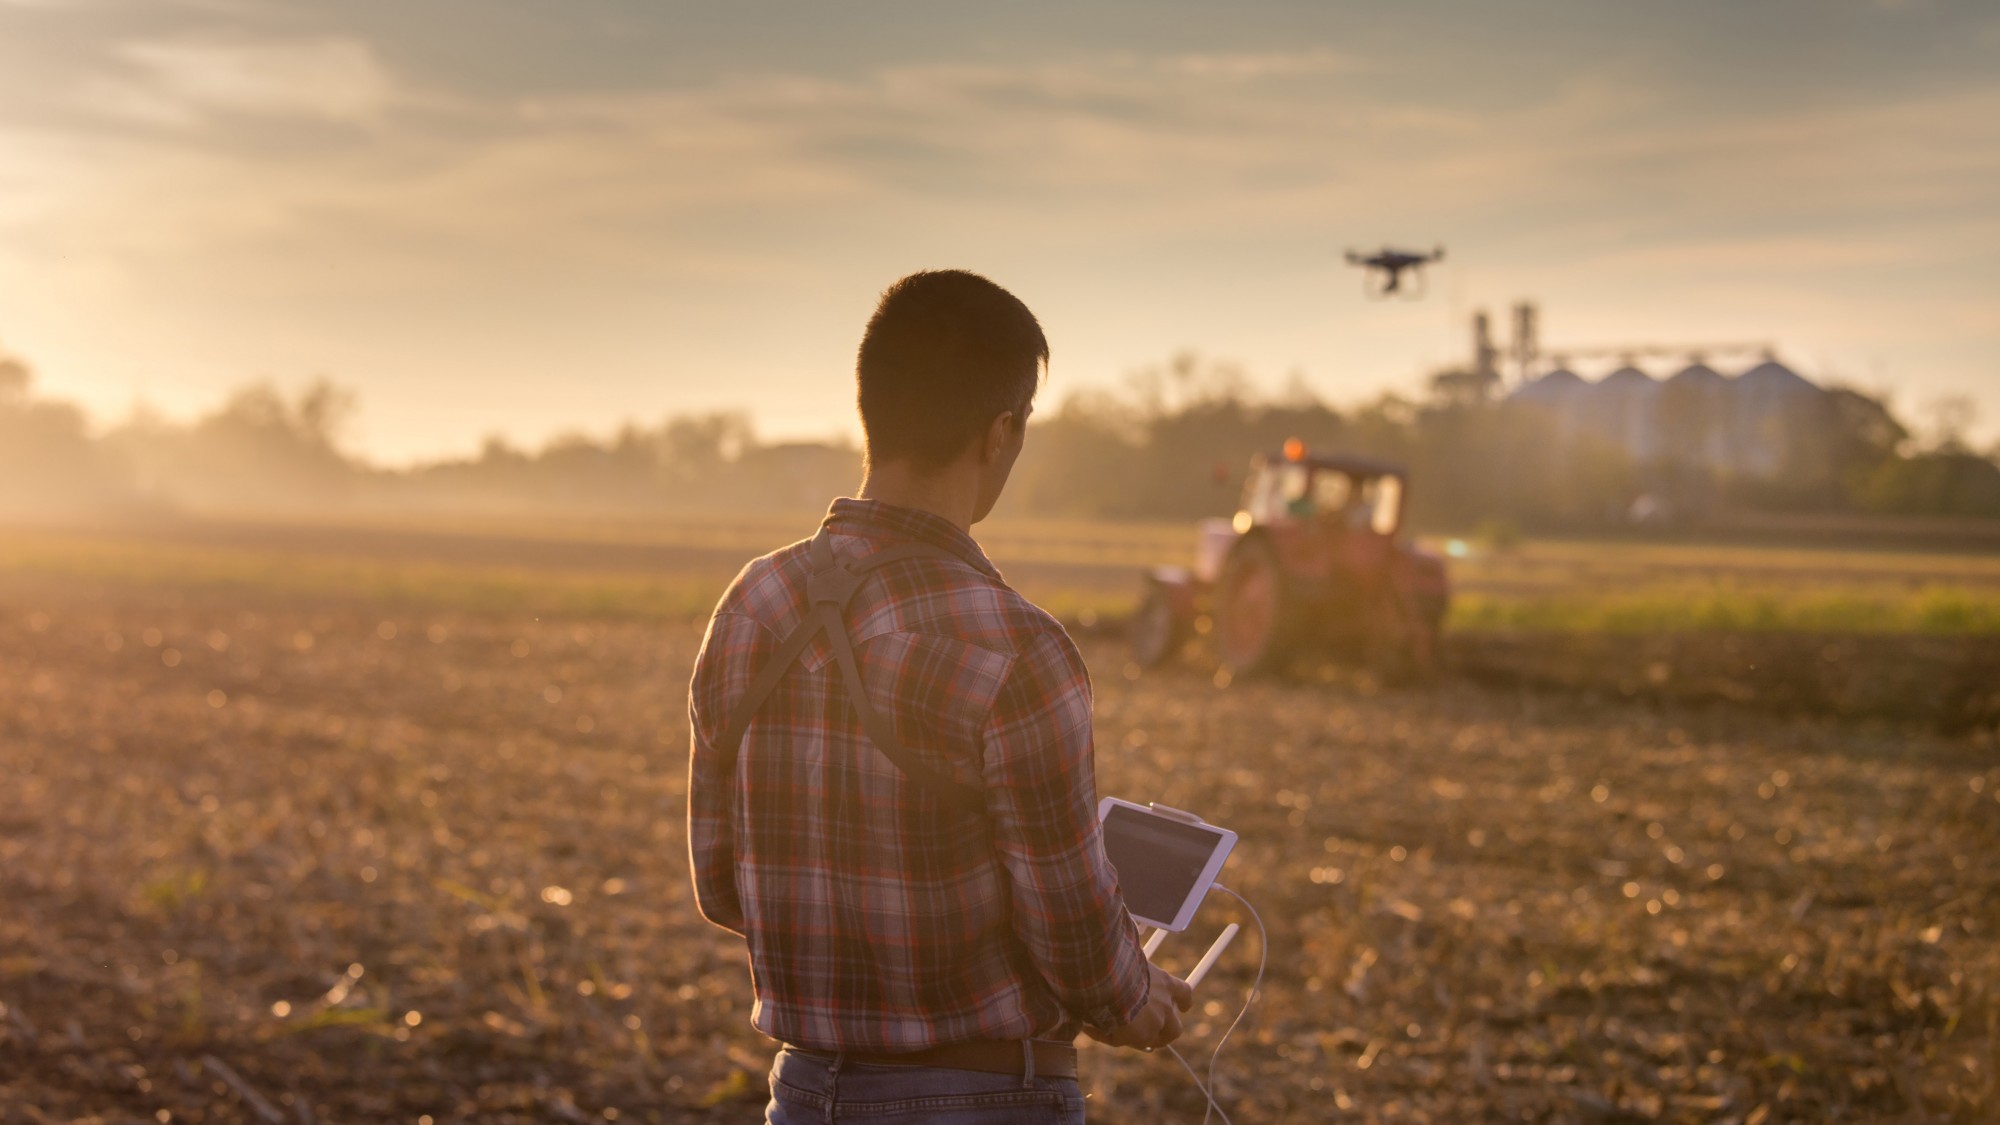 A farmer operates a drone to survey farmland, while a tractor undergoes cultivating operations